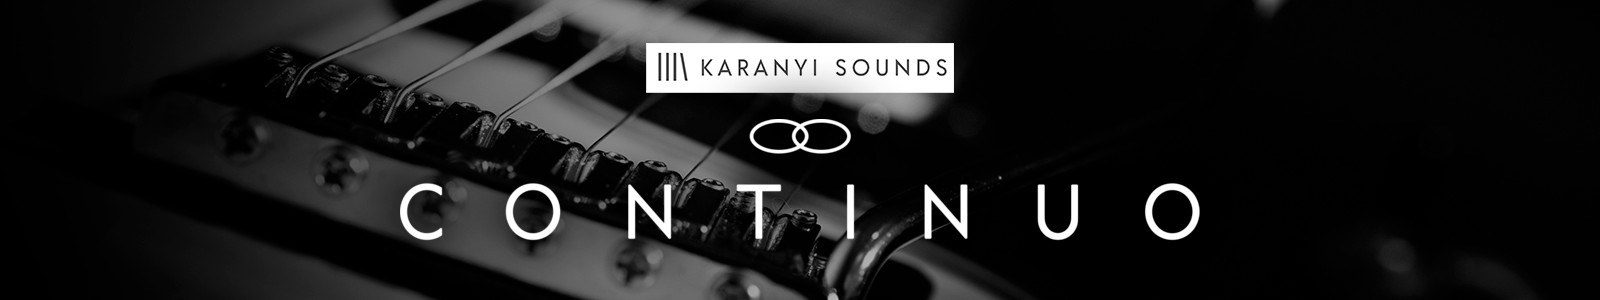 continuo by karanyi sounds